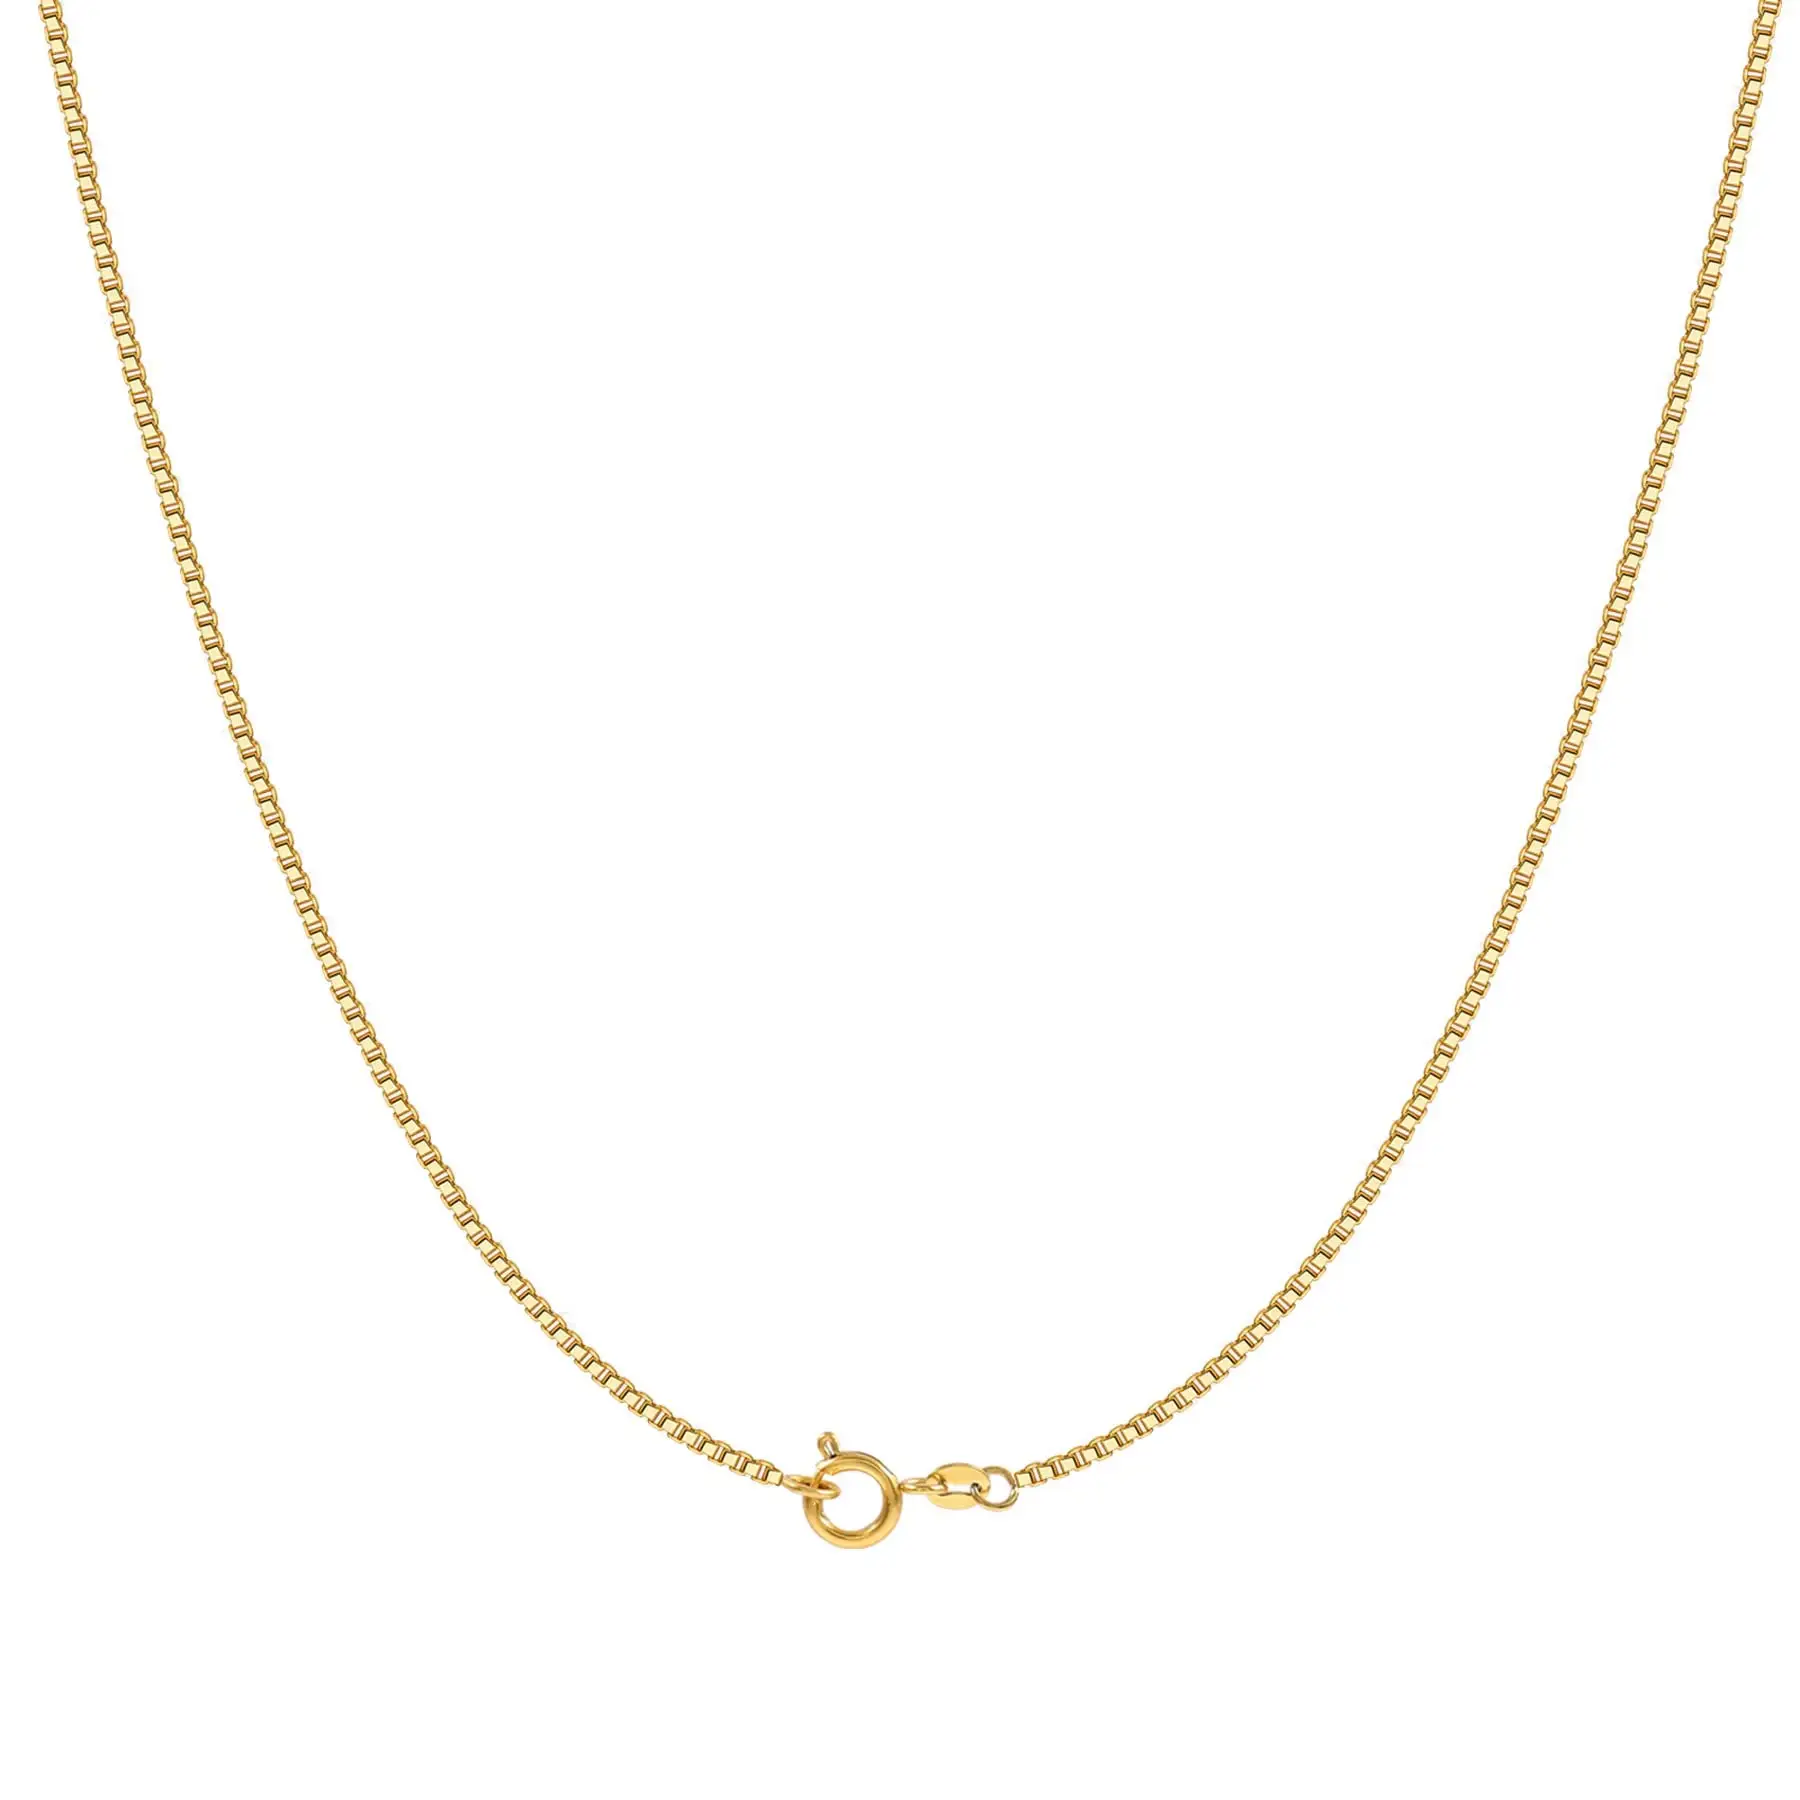 Box Chain Stainless Steel 18K Gold Plated Necklace For Women Men